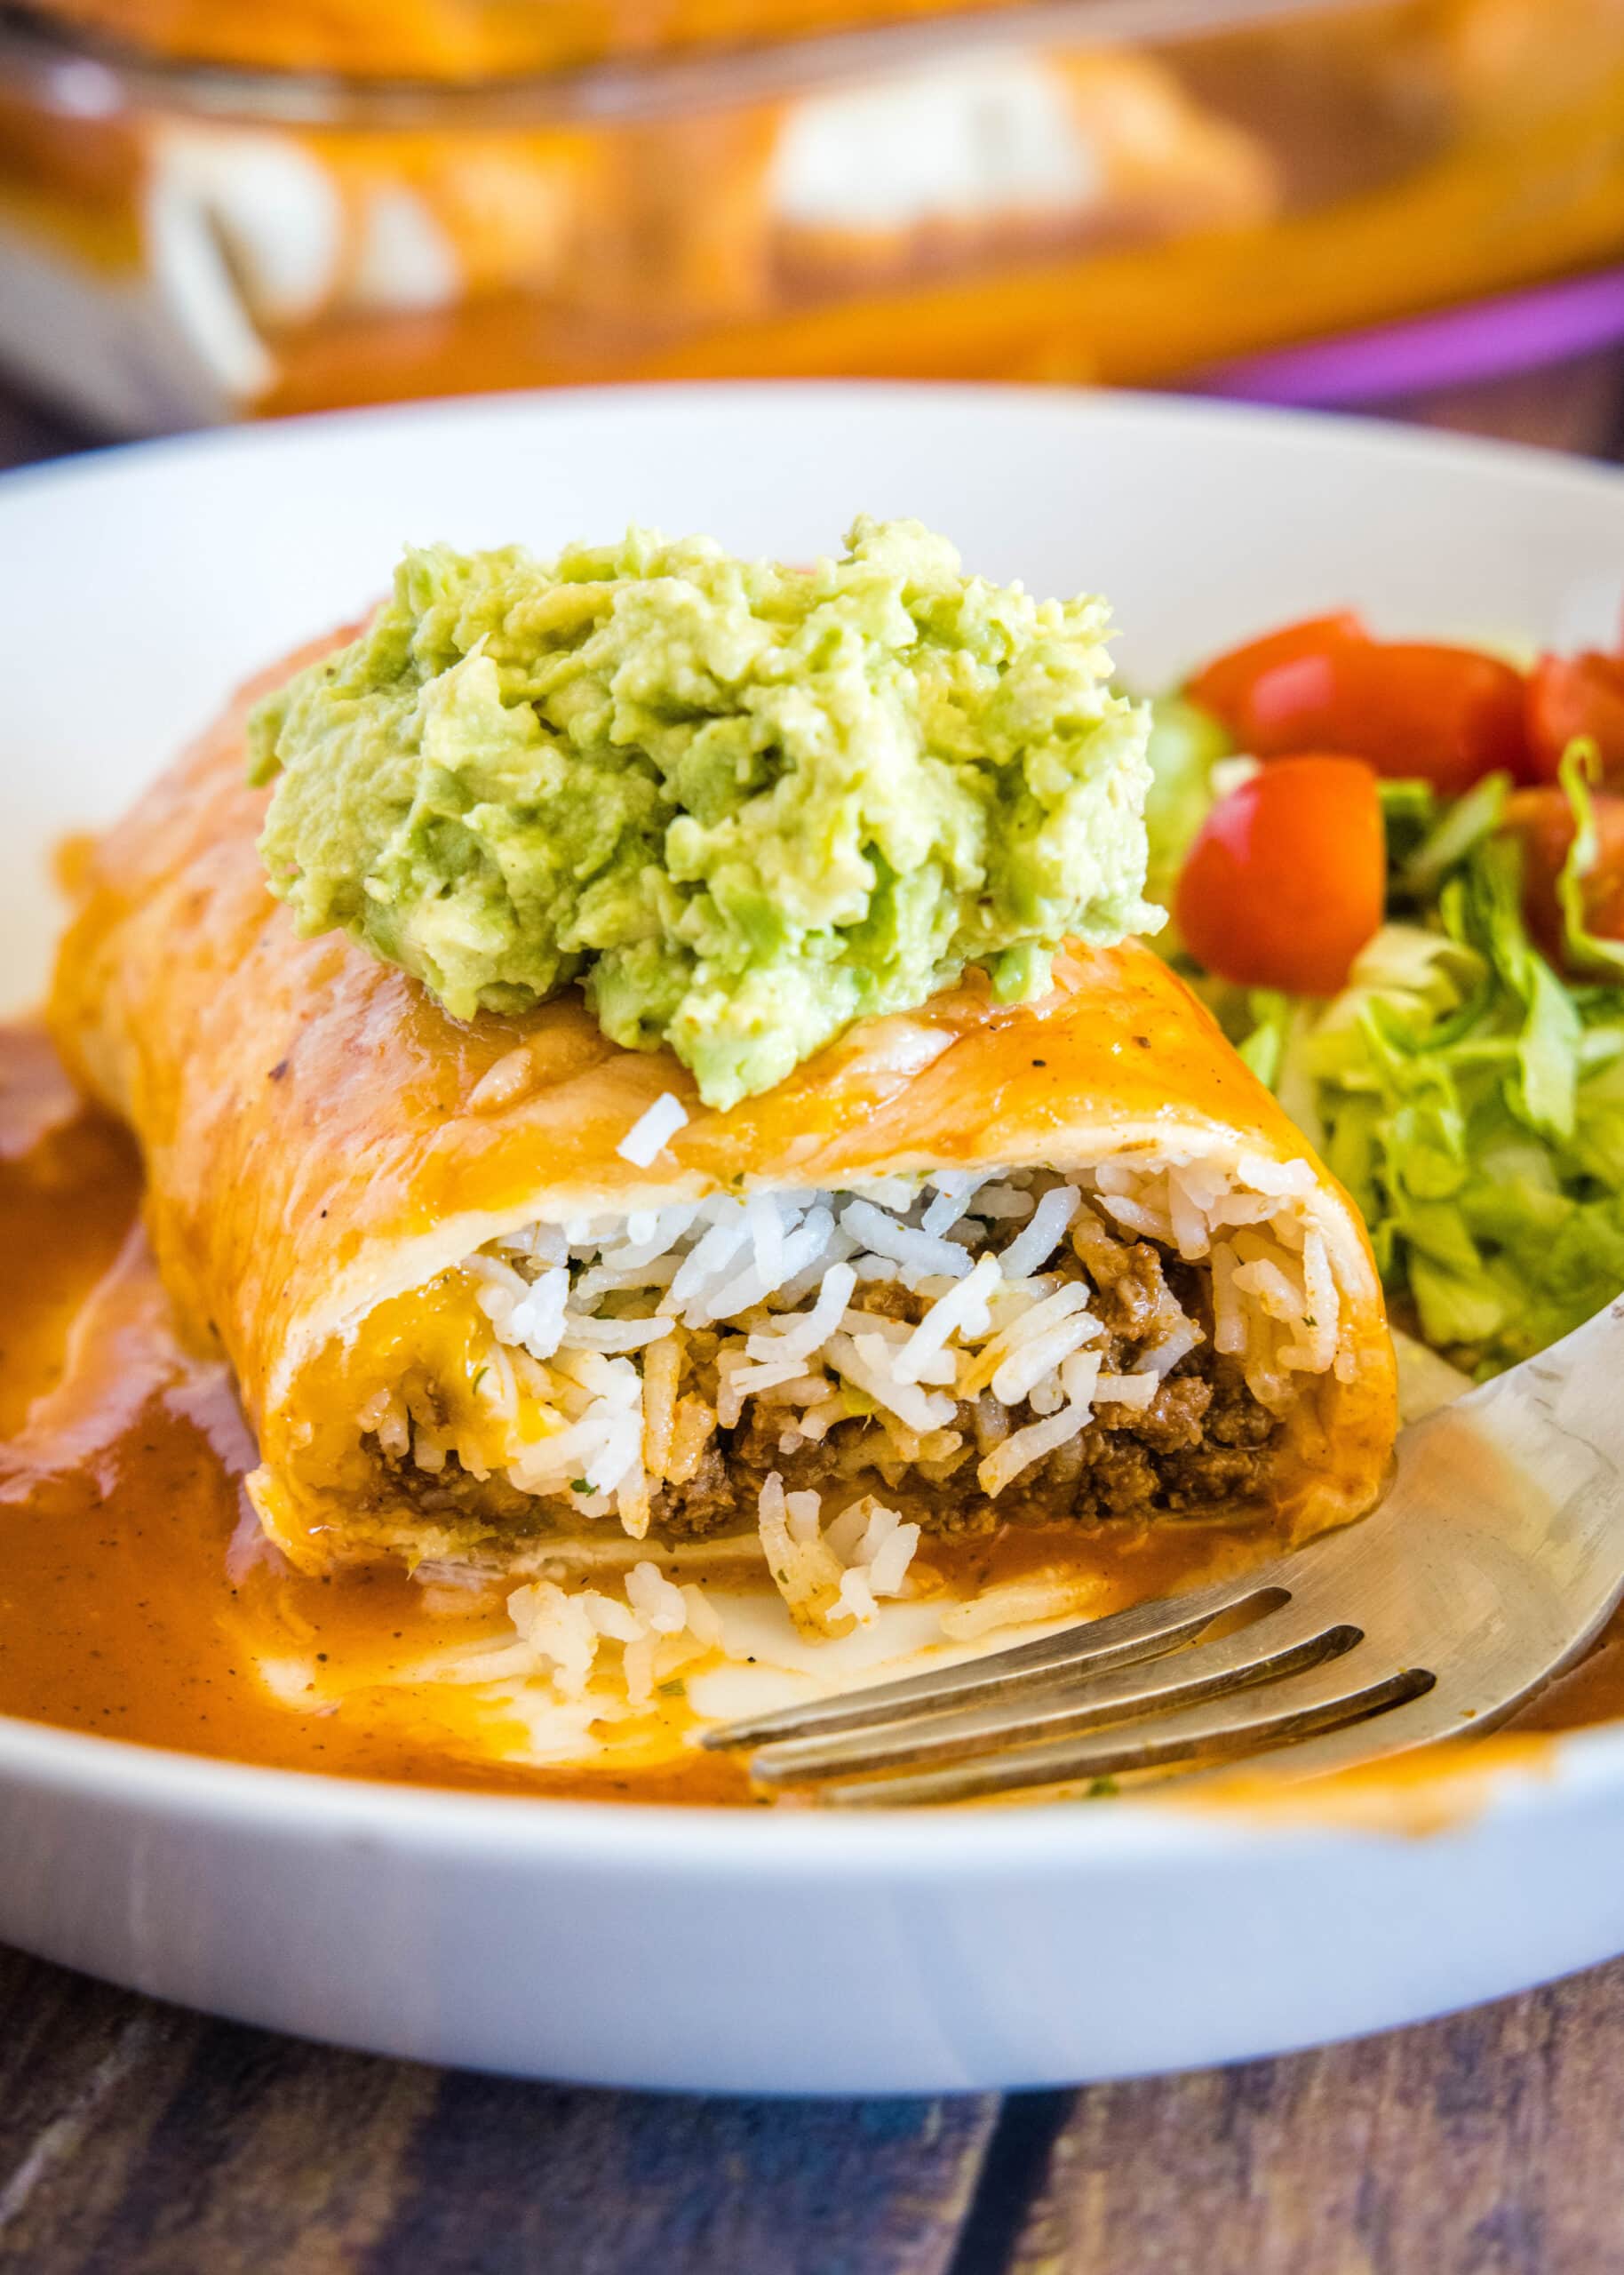 Cross section of half a wet burrito topped with guacamole on a plate, with beef and rice spilling out of it, next to a fork, some lettuce, and some tomato slices.